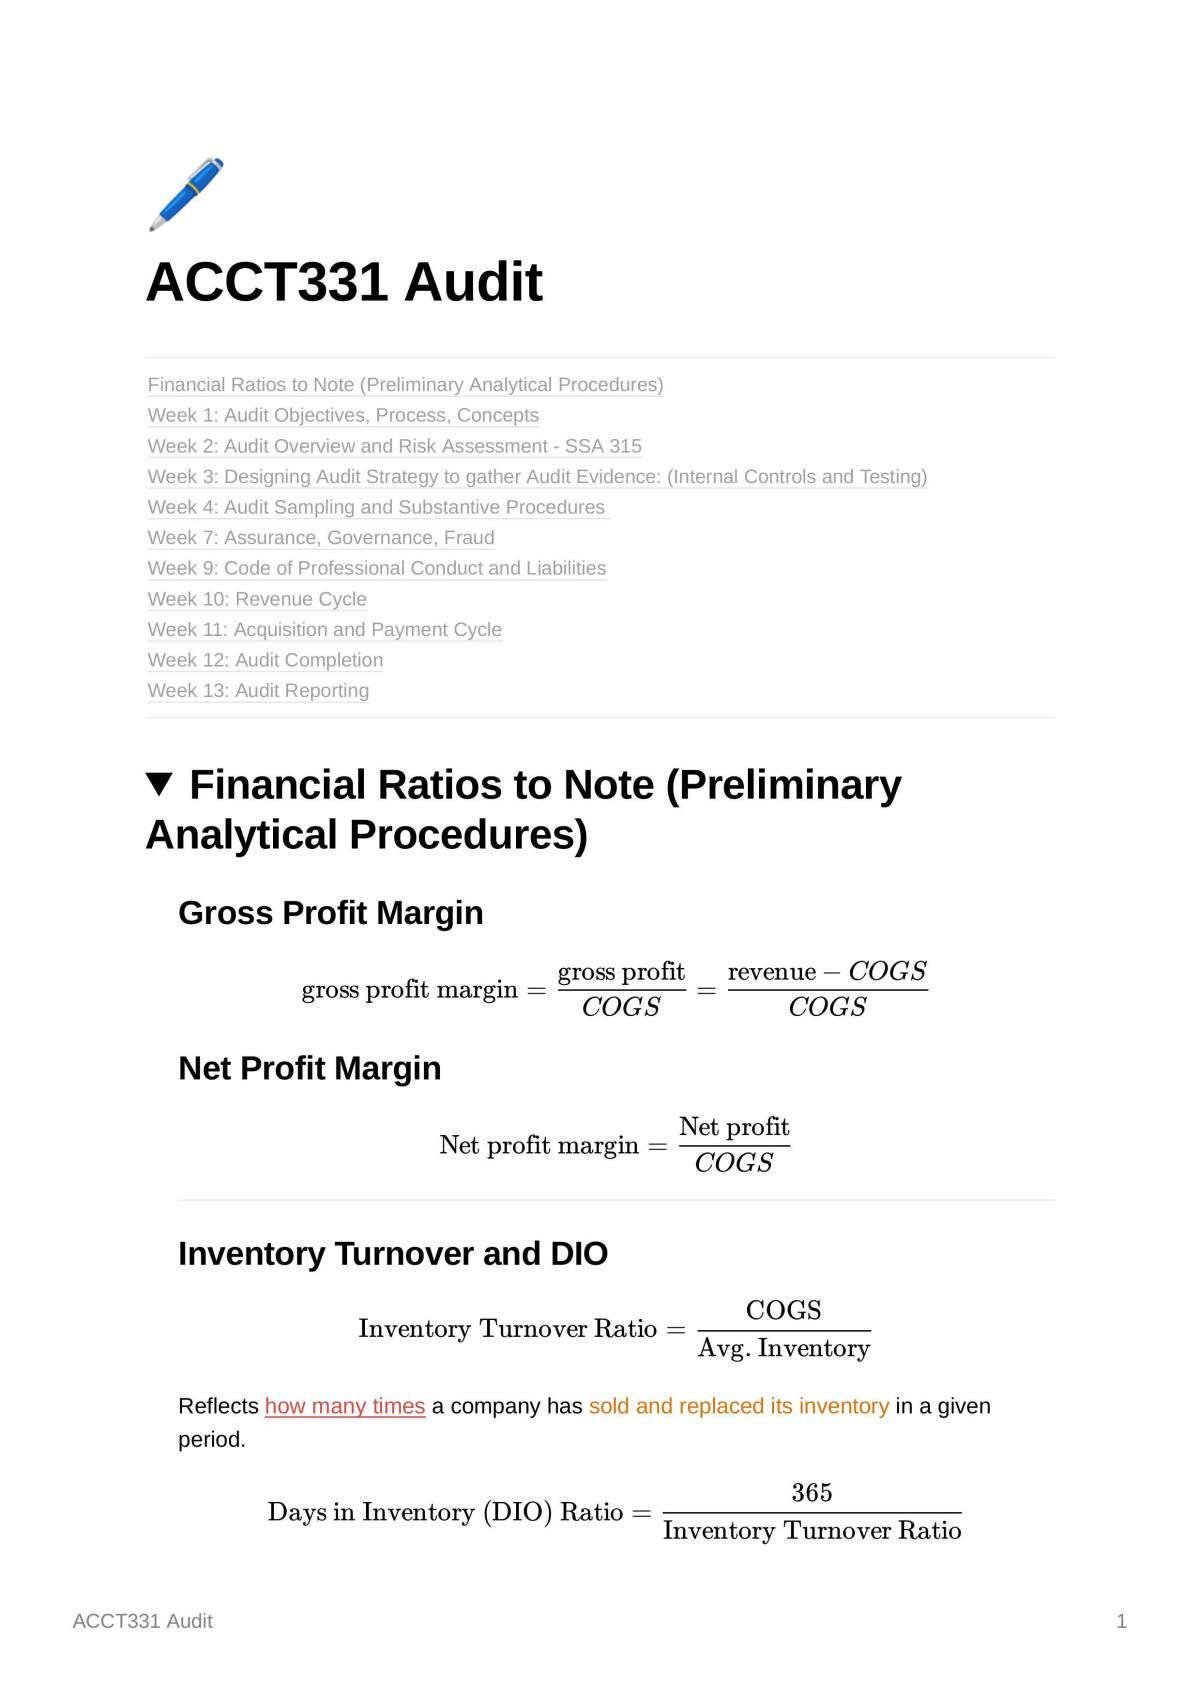 ACCT331 Audit Study Notes - Page 1